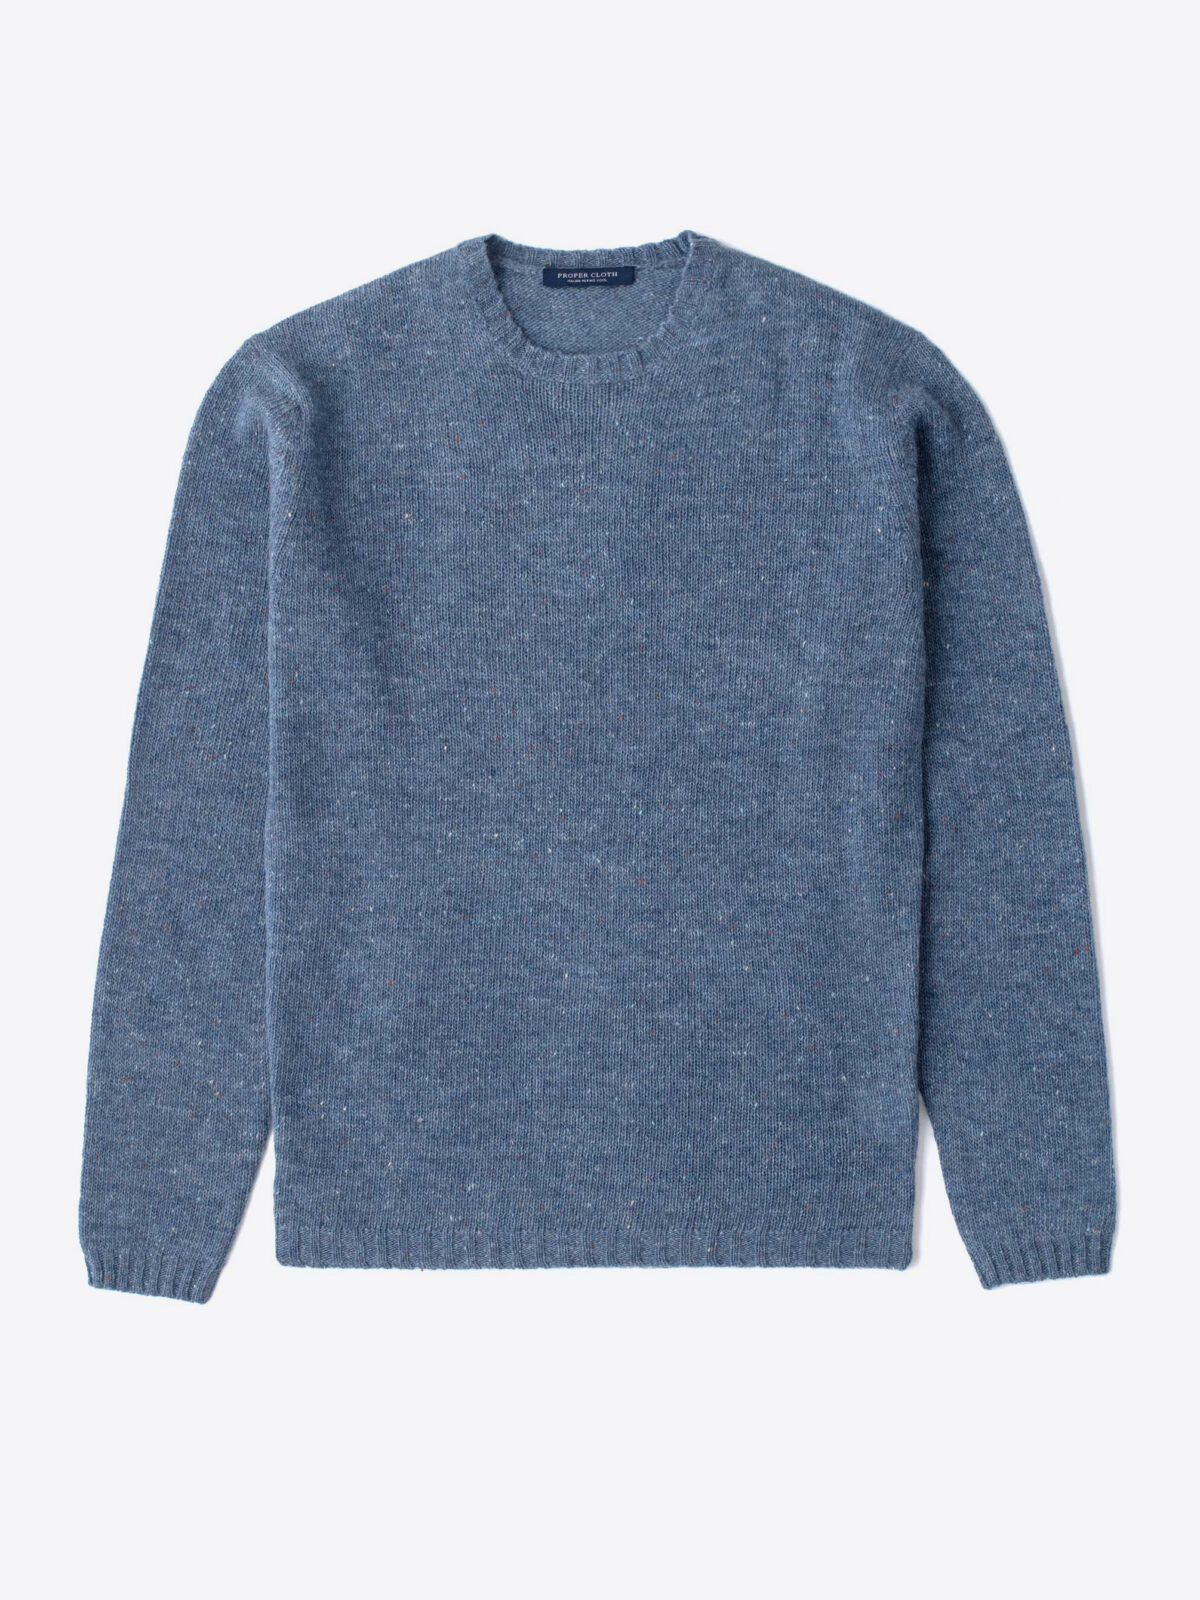 Slate Donegal Lambswool Sweater